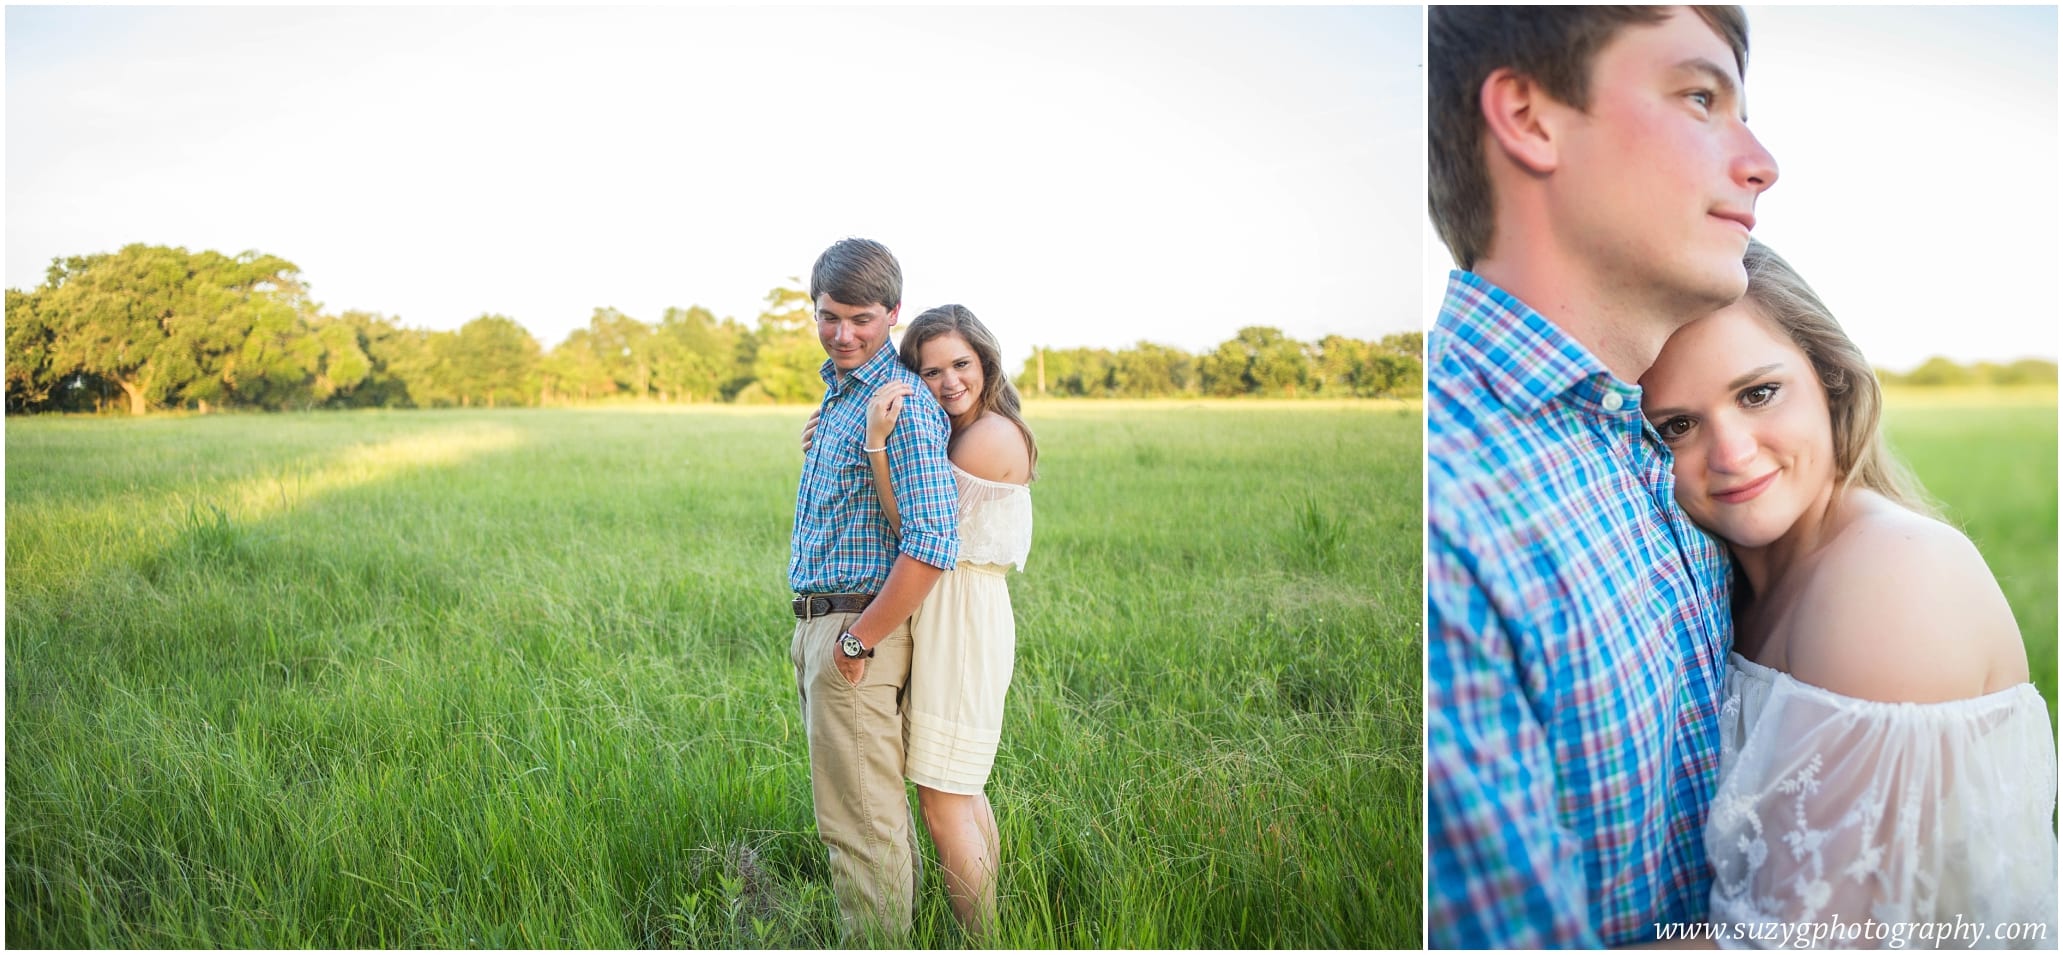 suzy-g-couples-engagement-photography-louisiana-engagement-photography-suzy-g_0022